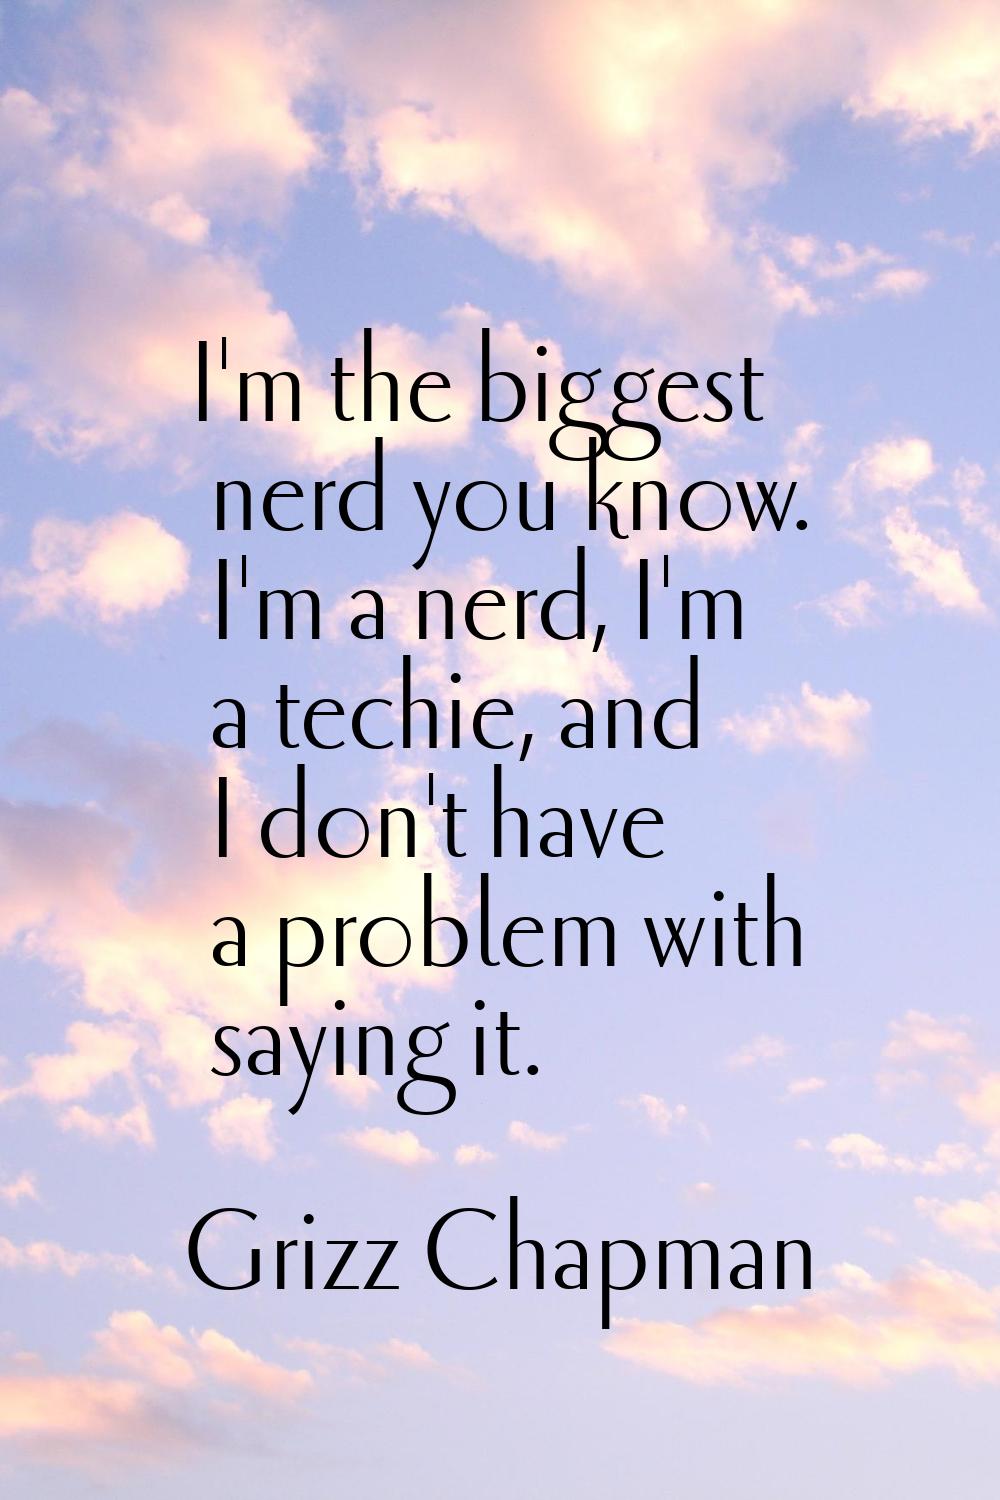 I'm the biggest nerd you know. I'm a nerd, I'm a techie, and I don't have a problem with saying it.